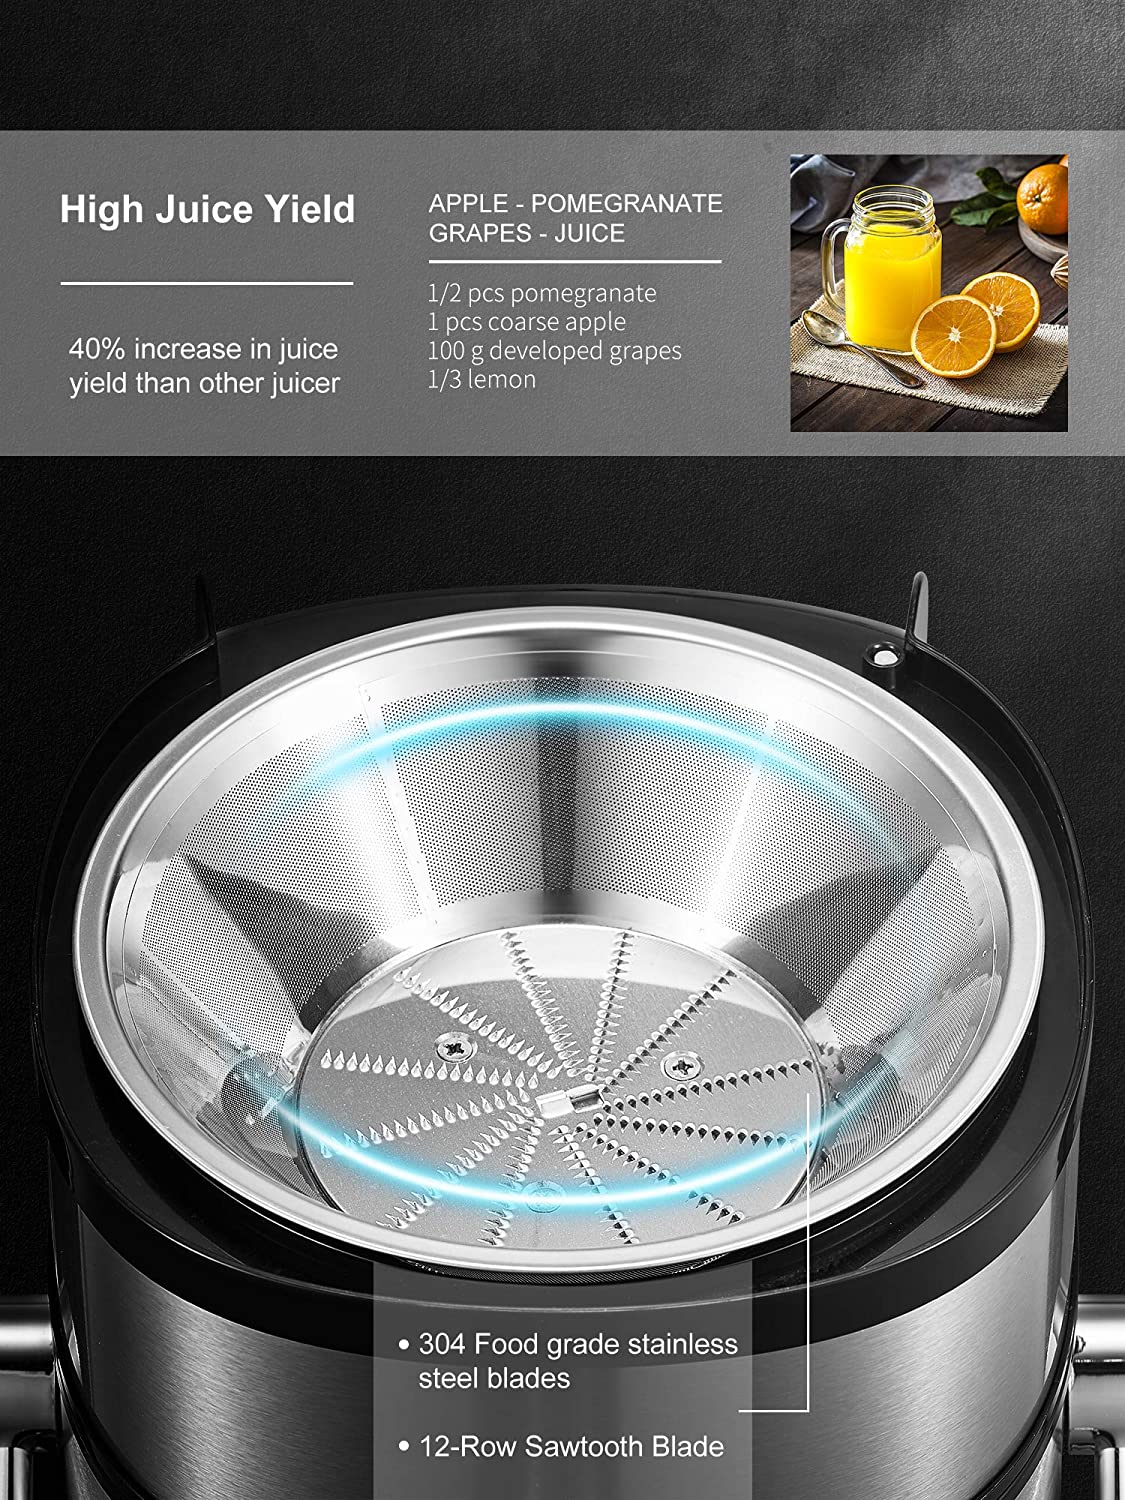 Juicer, Aicok Juicer Machine Vegetable and Fruit, Juice Extractor Easy to Clean, Centrifugal Juicer with 3 Feed Chute, Stainless Steel, 3 Speed, Anti